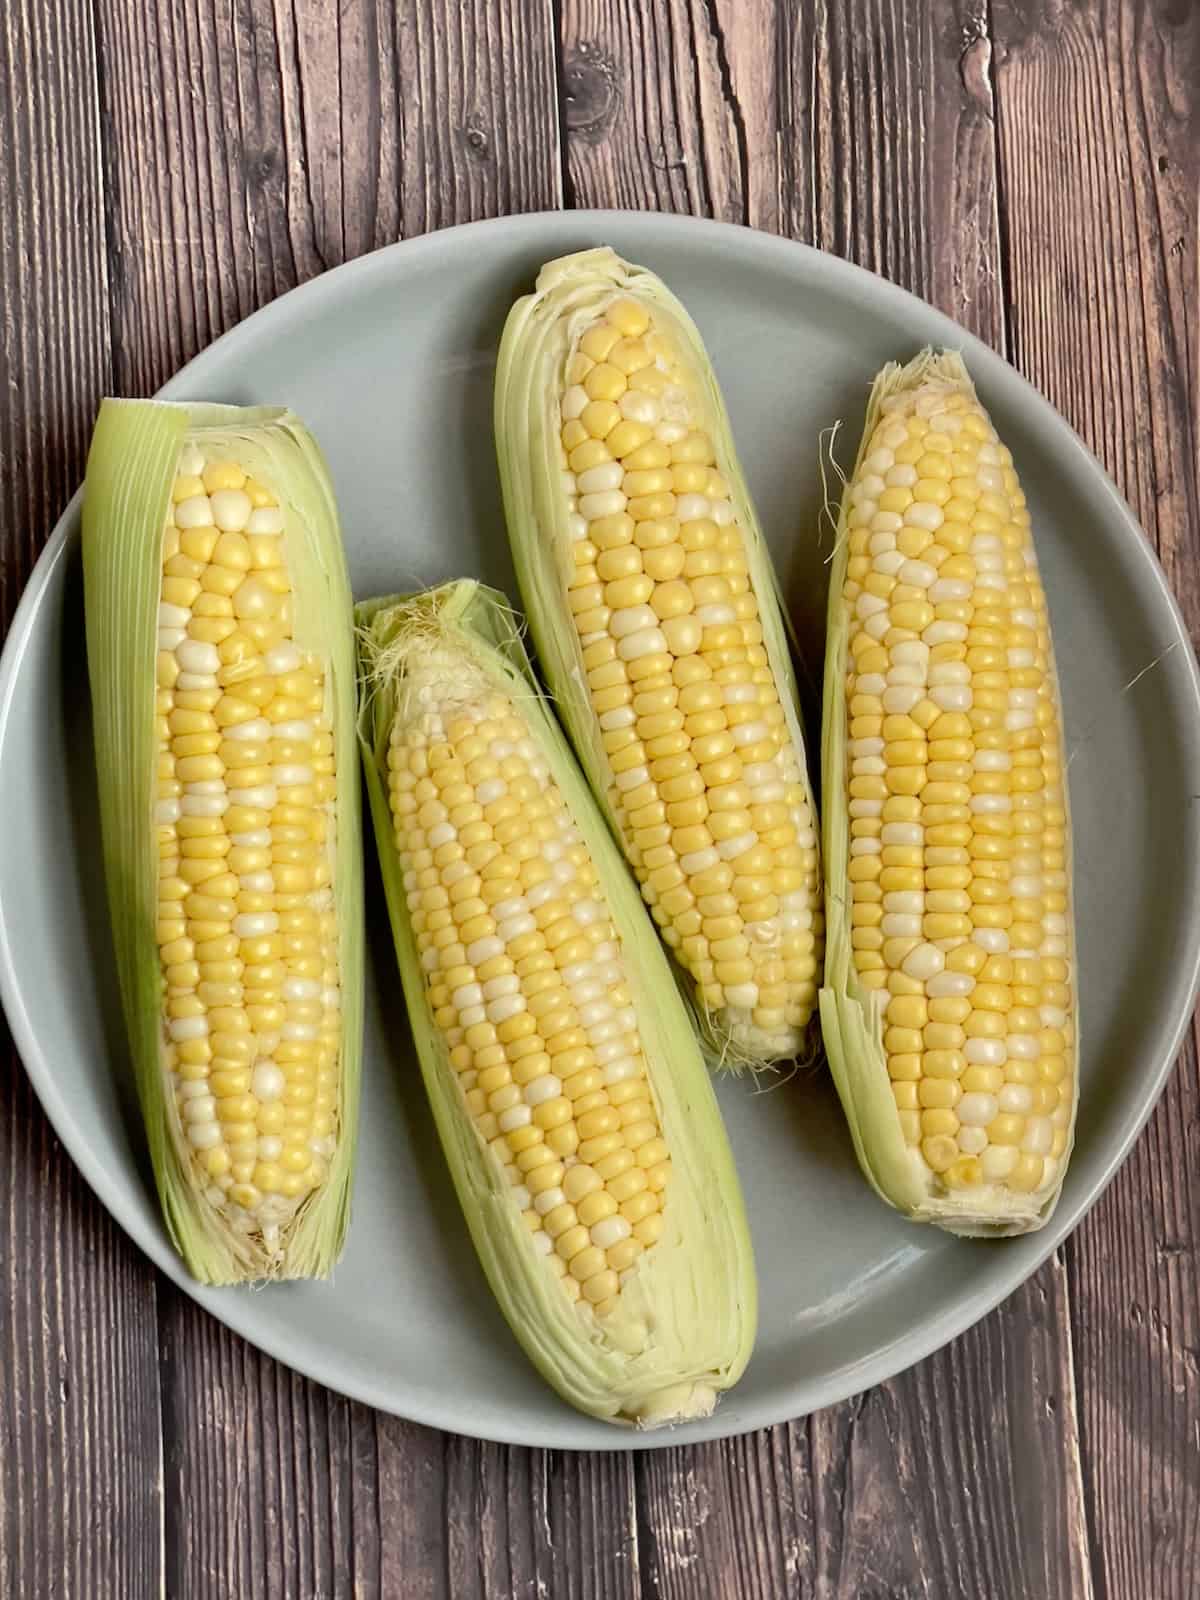 four ears of corn on a gray plate in their husks